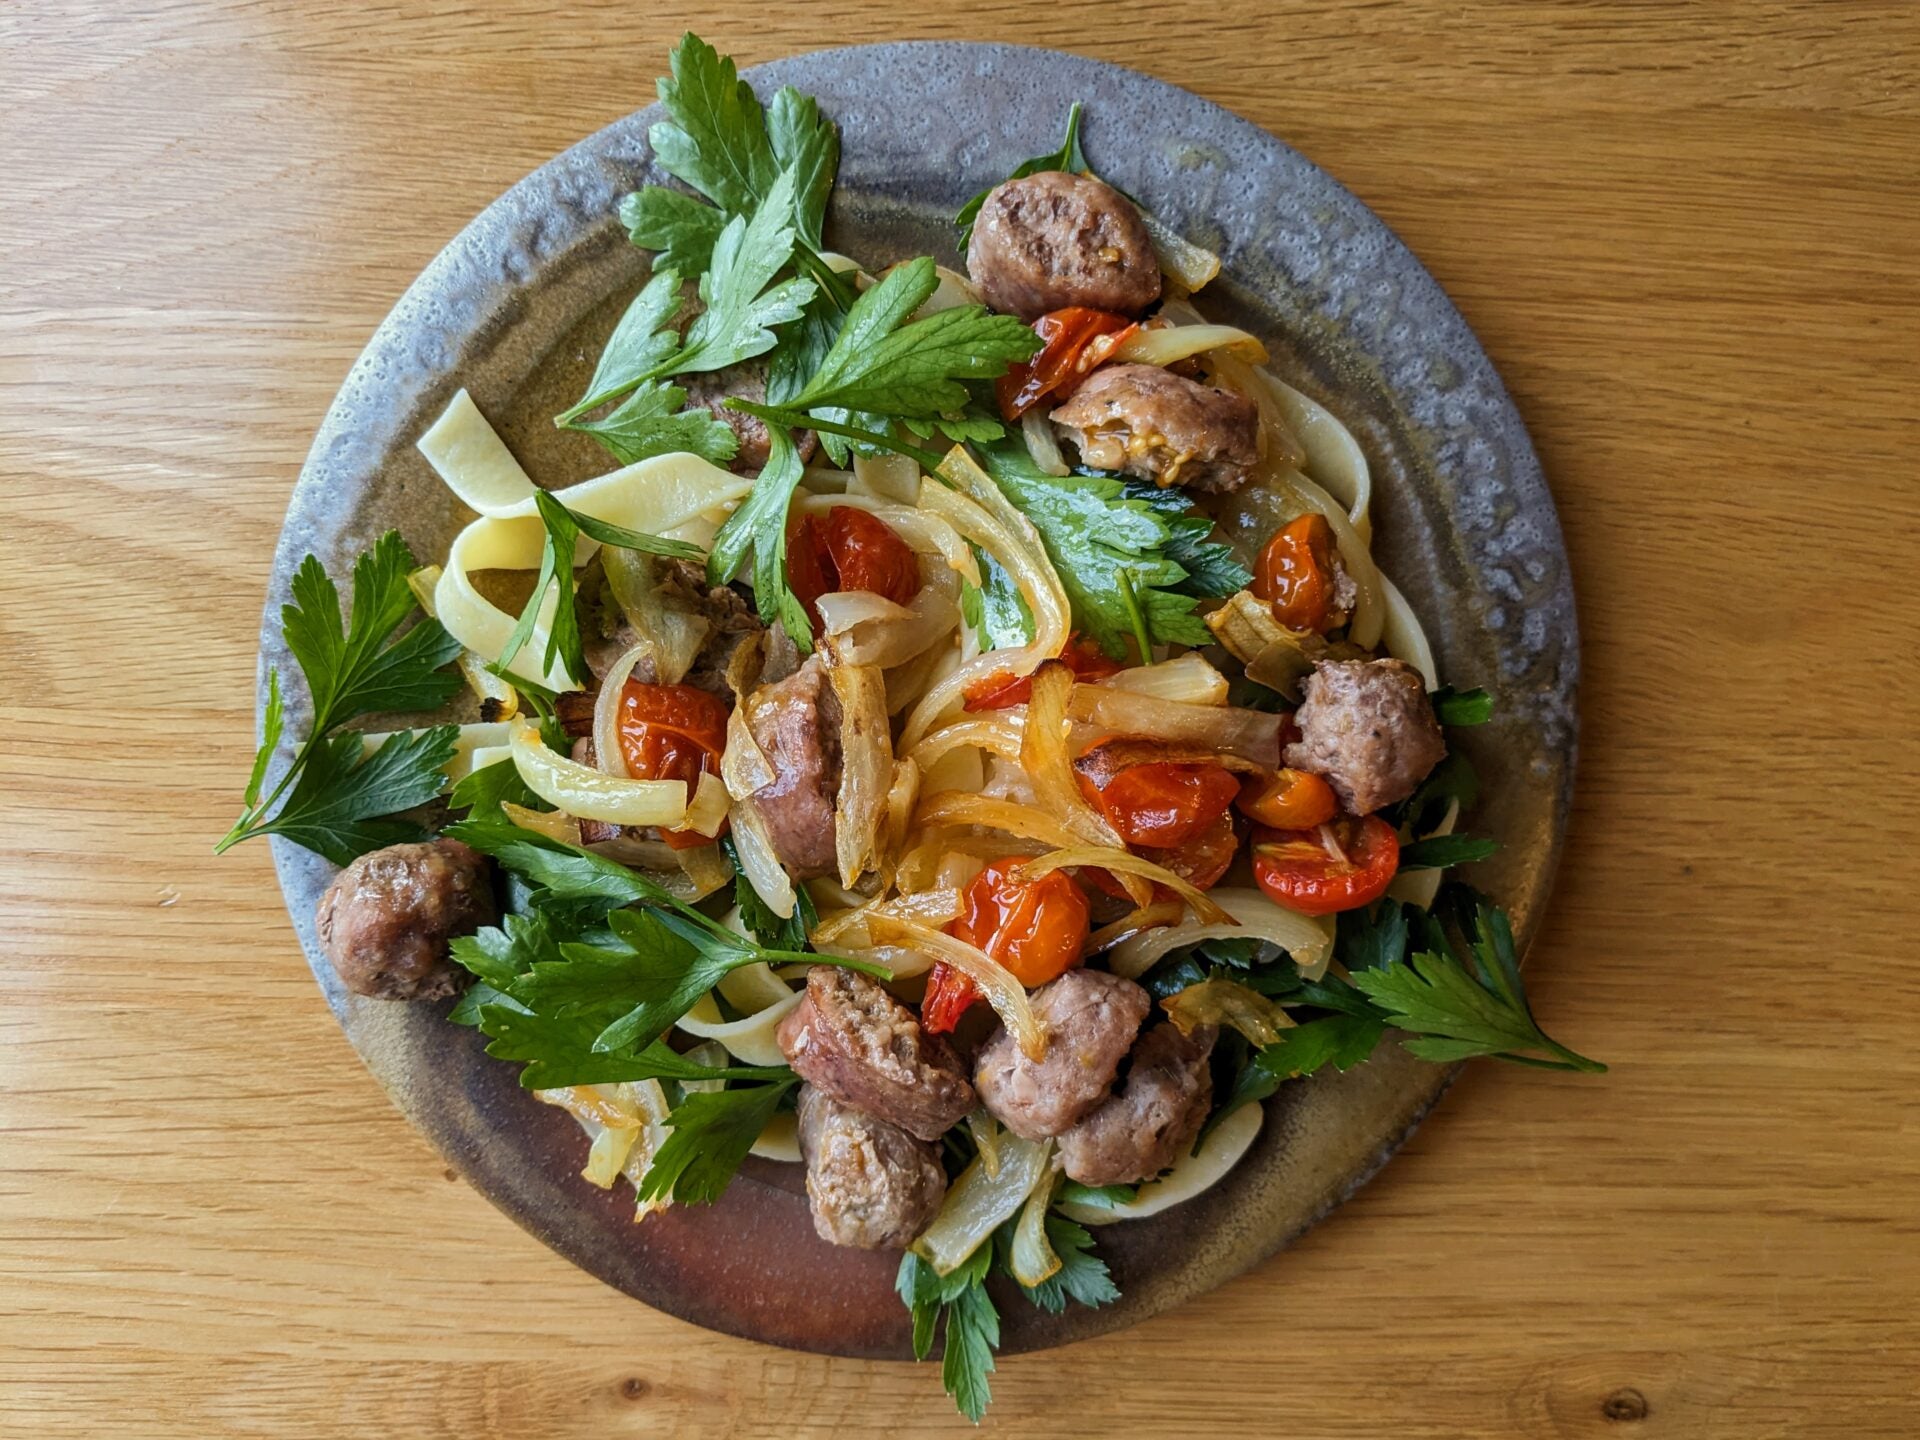 Linguine with tomato, sausage, and herbs.